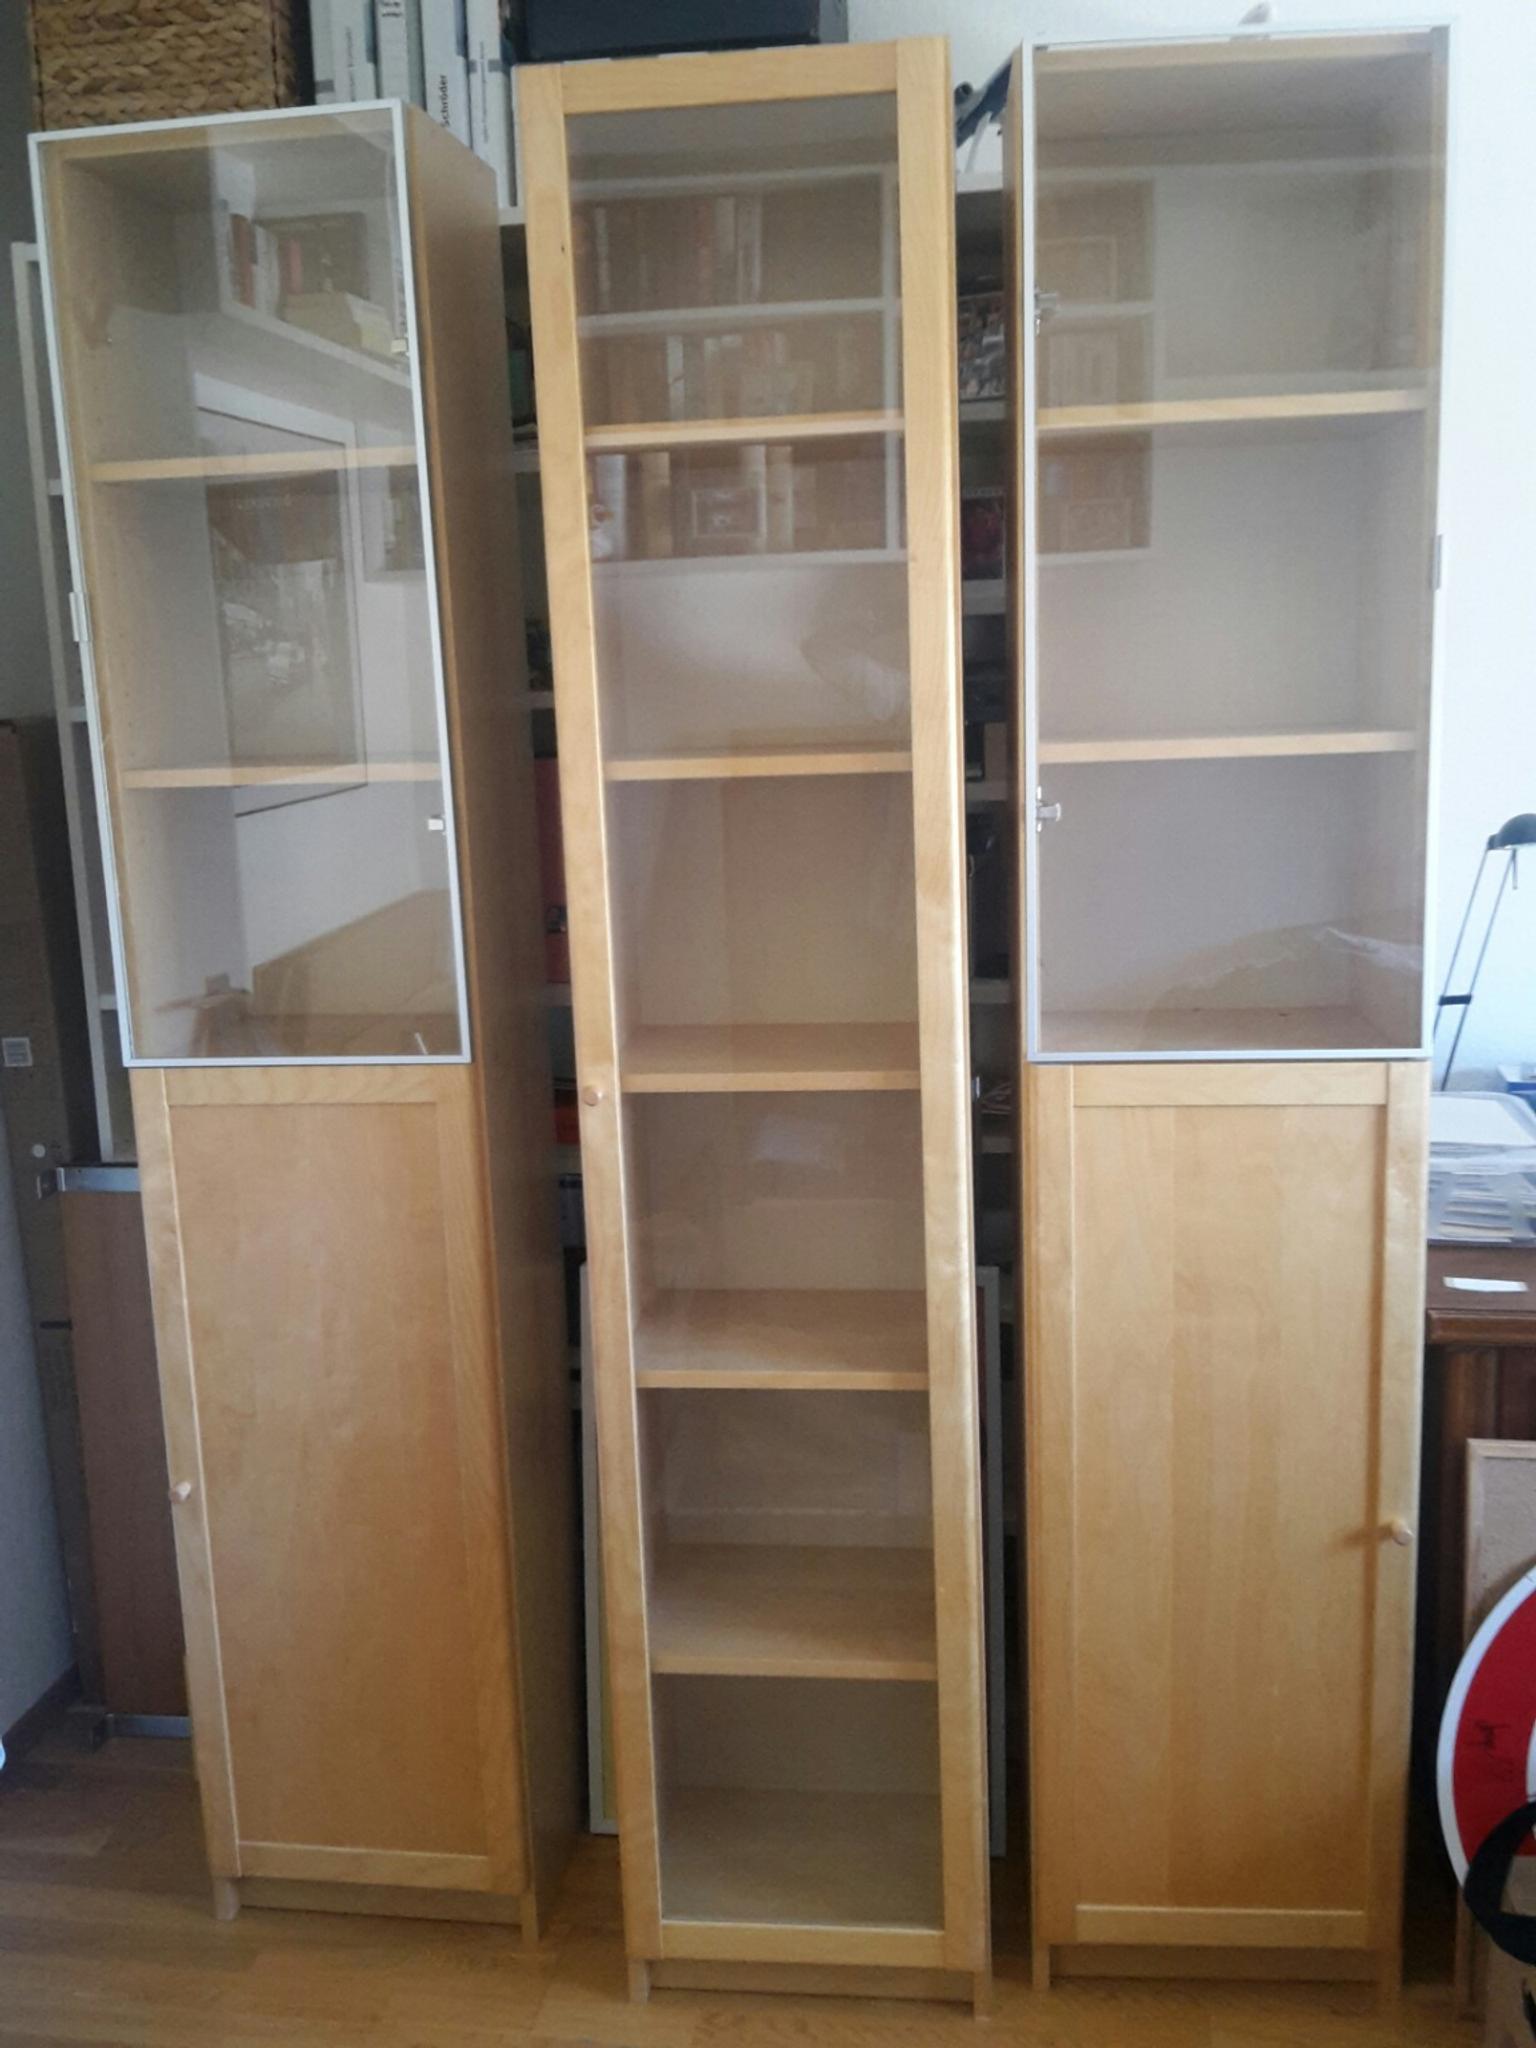 Billy Regale Von Ikea In 603 Frankfurt Am Main For 40 00 For Sale Shpock